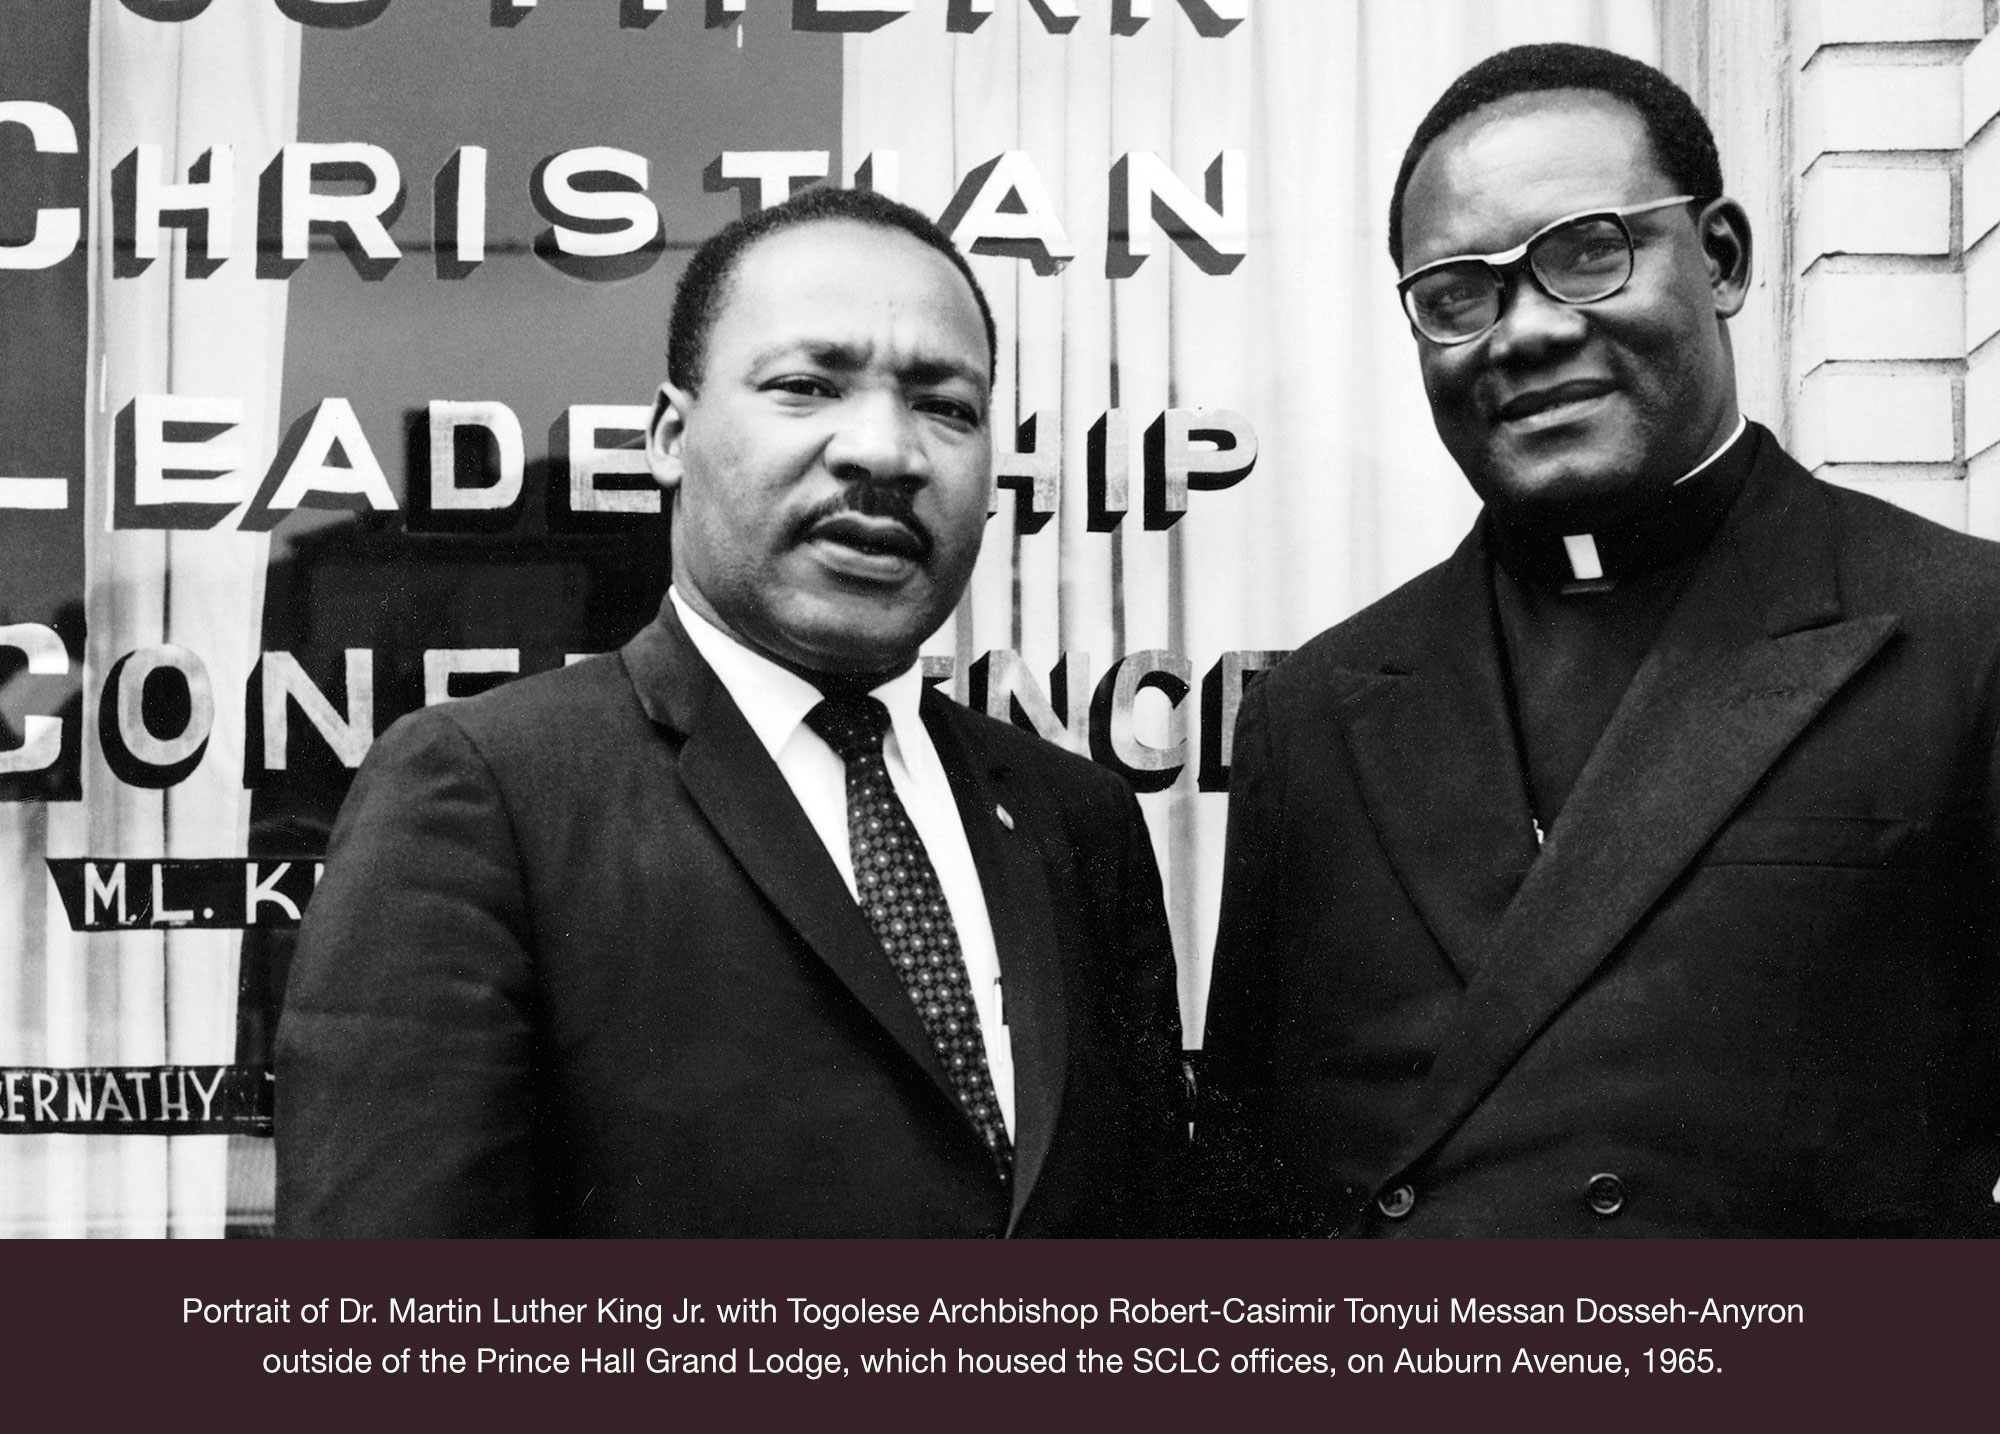 Portrait of Dr. Martin Luther King Jr. with Togolese Archbishop Robert-Casimir Tonyui Messan Dosseh-Anyron outside of the Prince Hall Grand Lodge, which housed the SCLC offices, on Auburn Avenue, 1965.